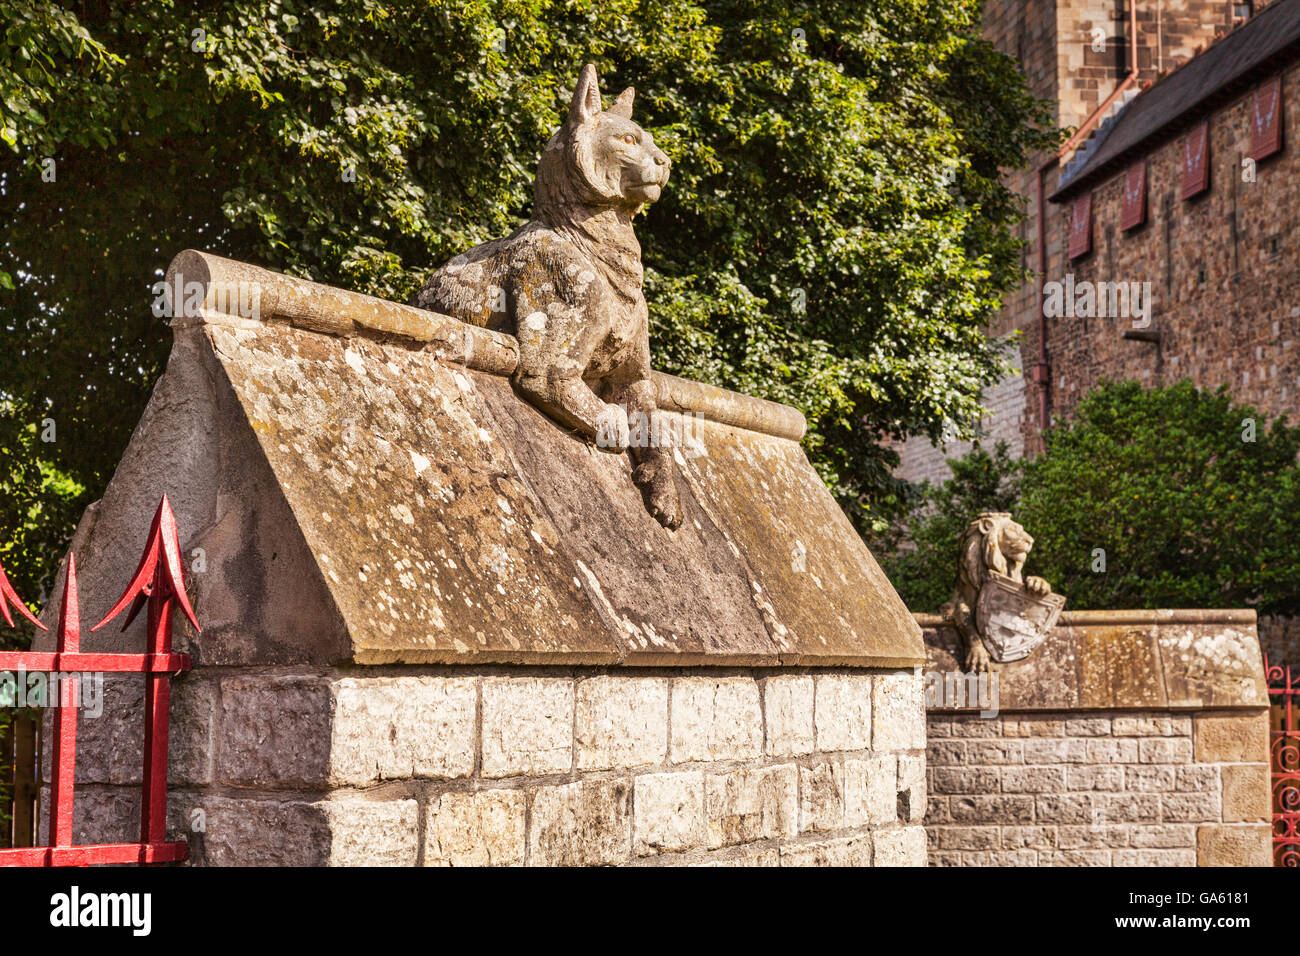 27 June 2016: Cardiff, Wales, UK - The Animal Wall in Cardiff city centre. Stock Photo